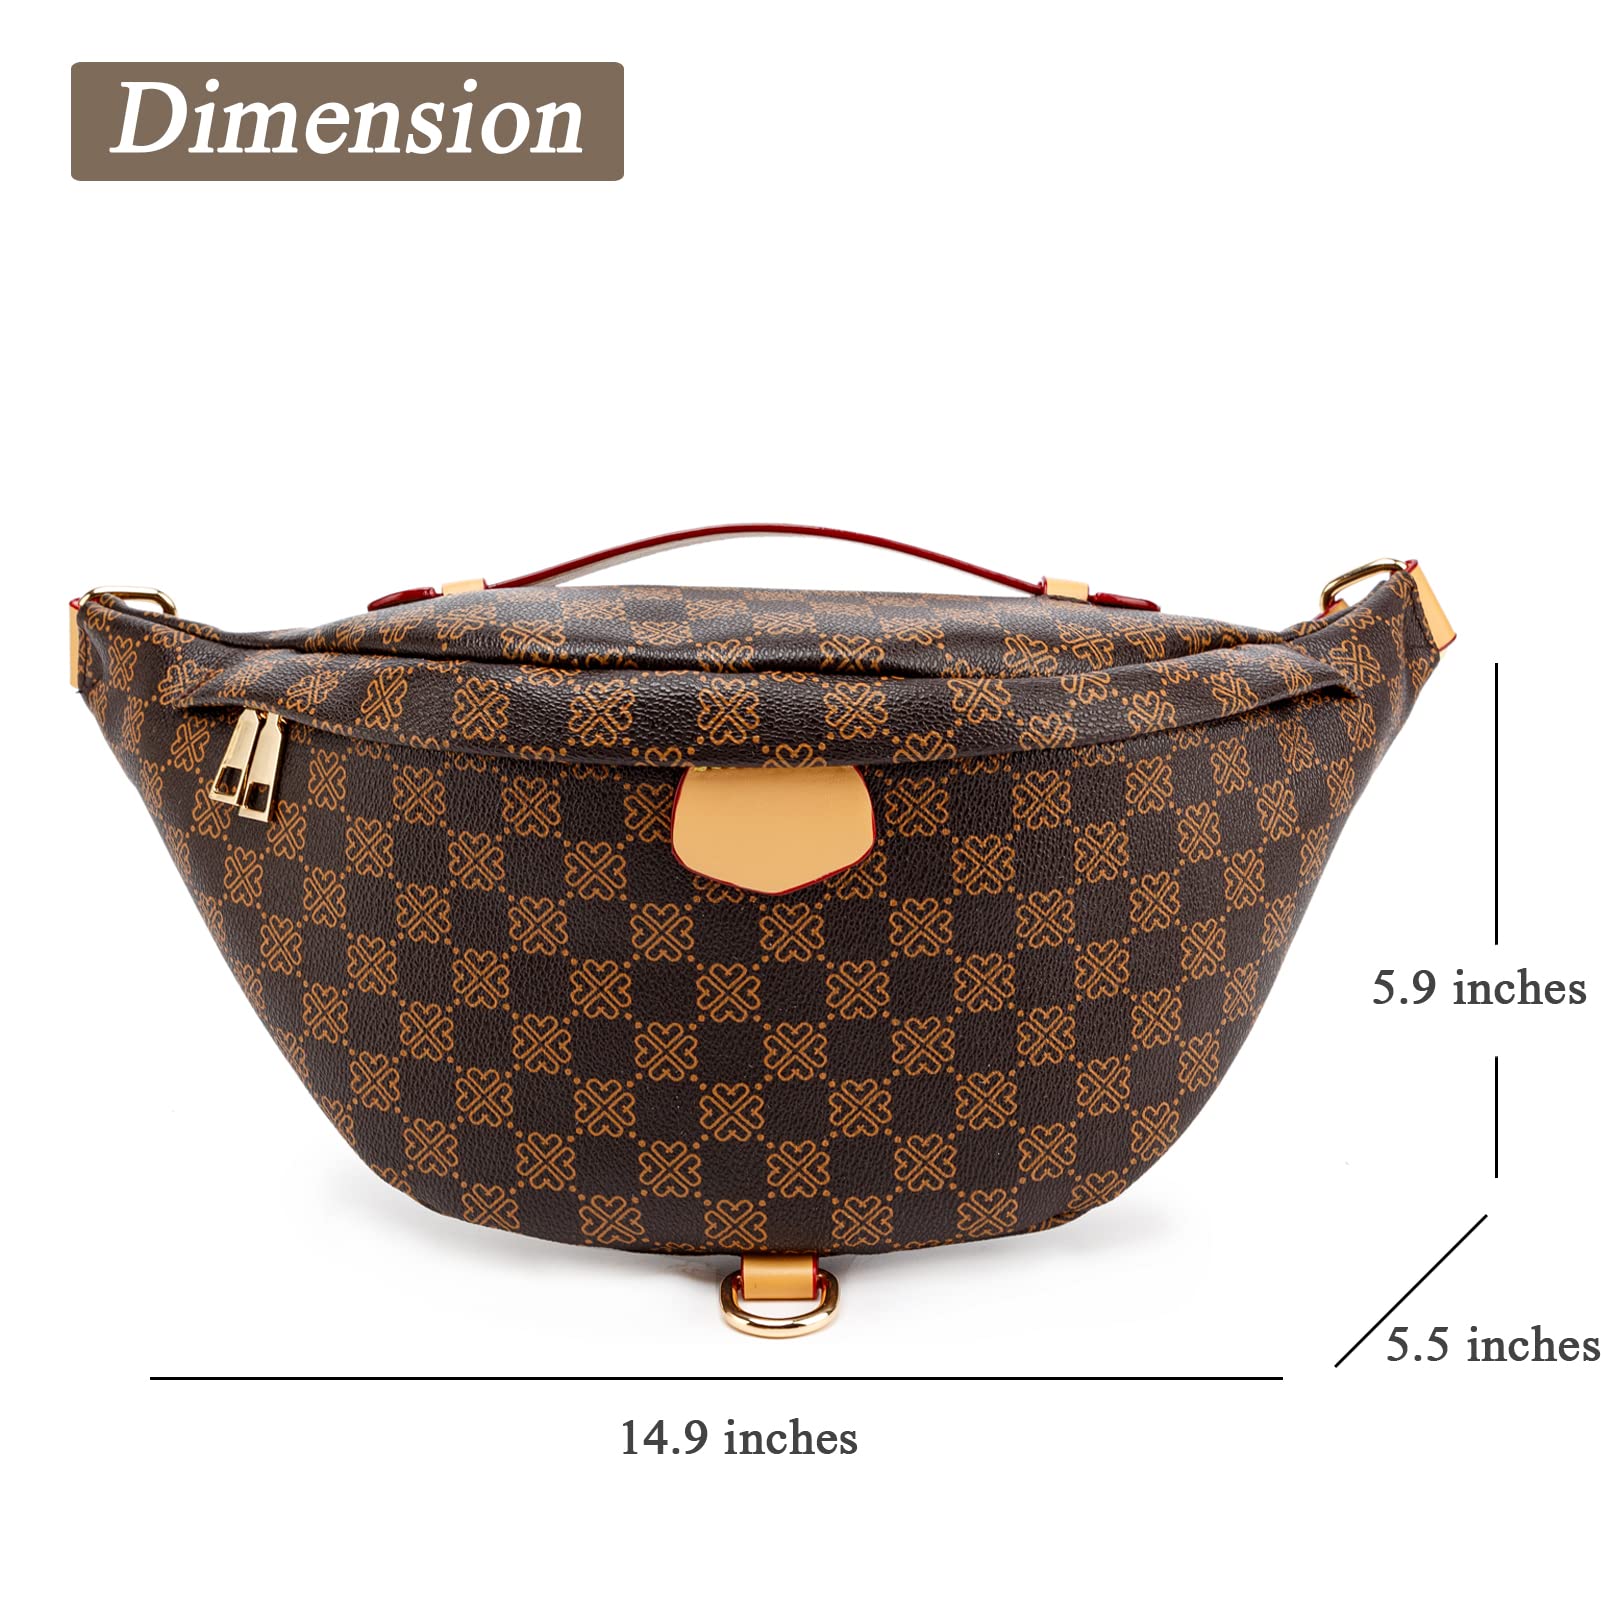  Belt Bag for Women Fashion Crossbody Fanny Packs Causal Waist  Hip Bum Bag Leather Chest Daypack Purses Travel Pouch Sling Backpack Bag